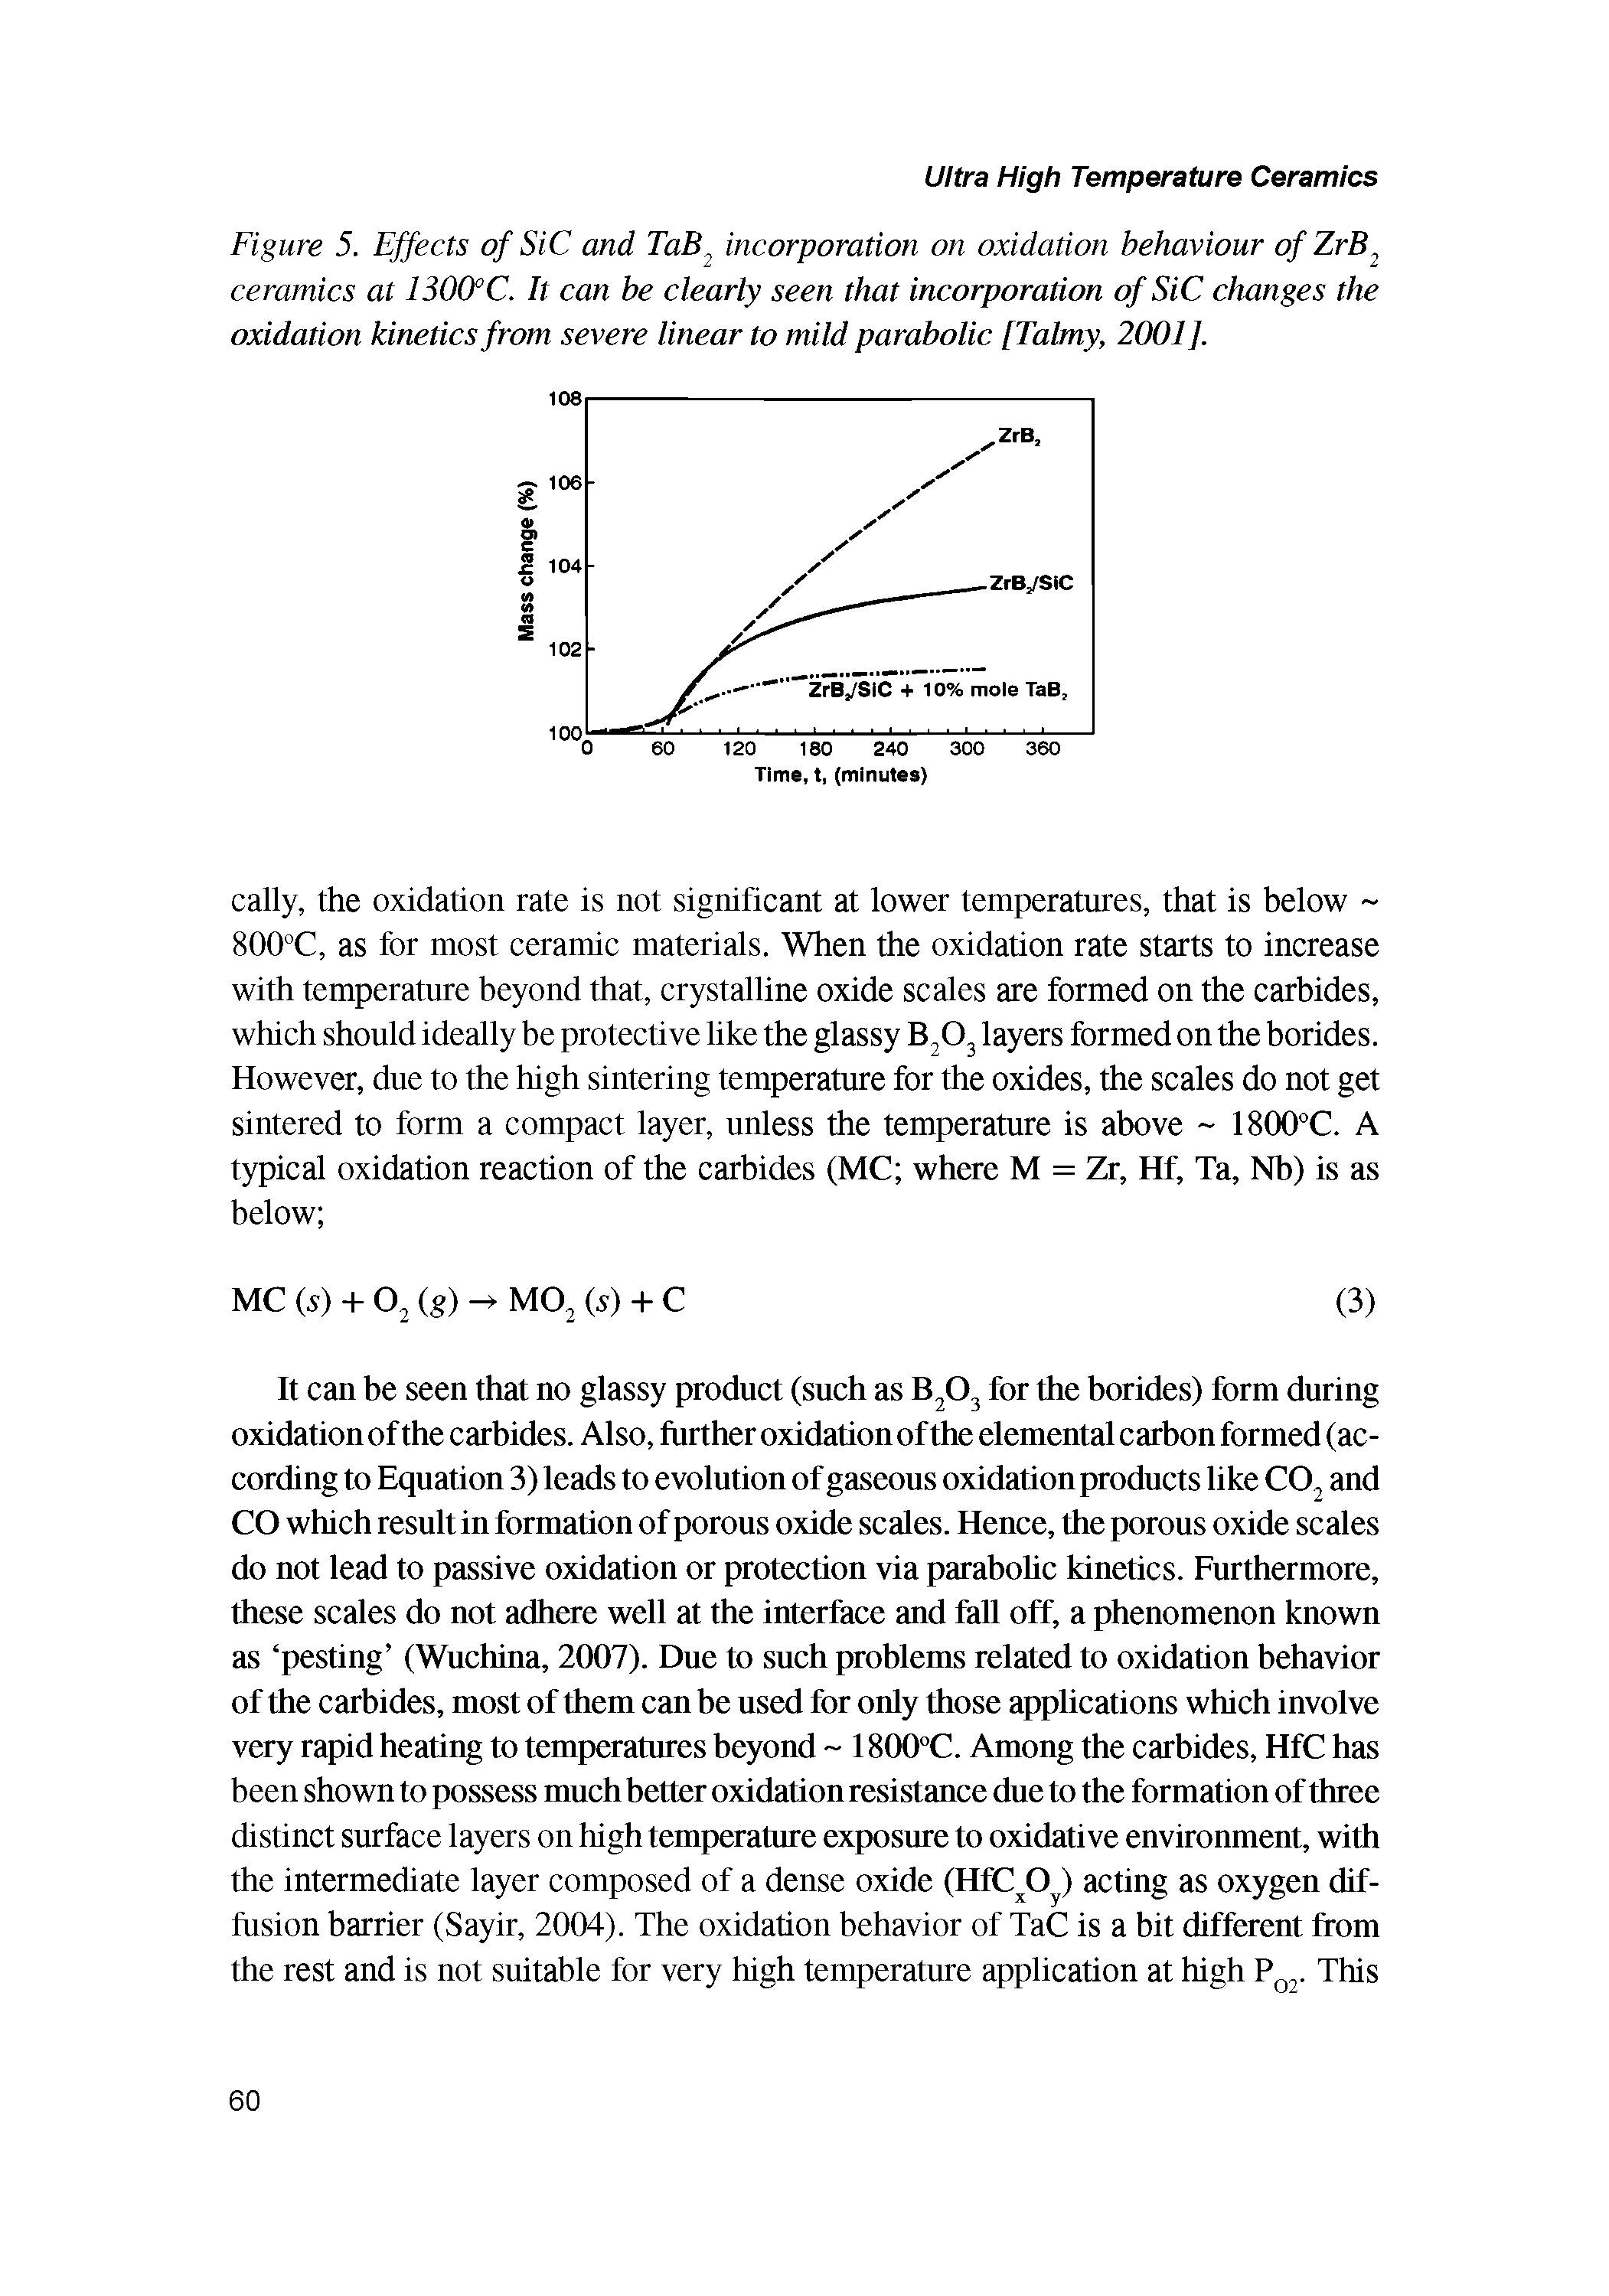 Figure 5. Effects of SiC and TaB incorporation on oxidation behaviour ofZrB ceramics at 130(FC. It can be clearly seen that incorporation of SiC changes the oxidation kinetics from severe linear to mild parabolic [Talmy, 2001].